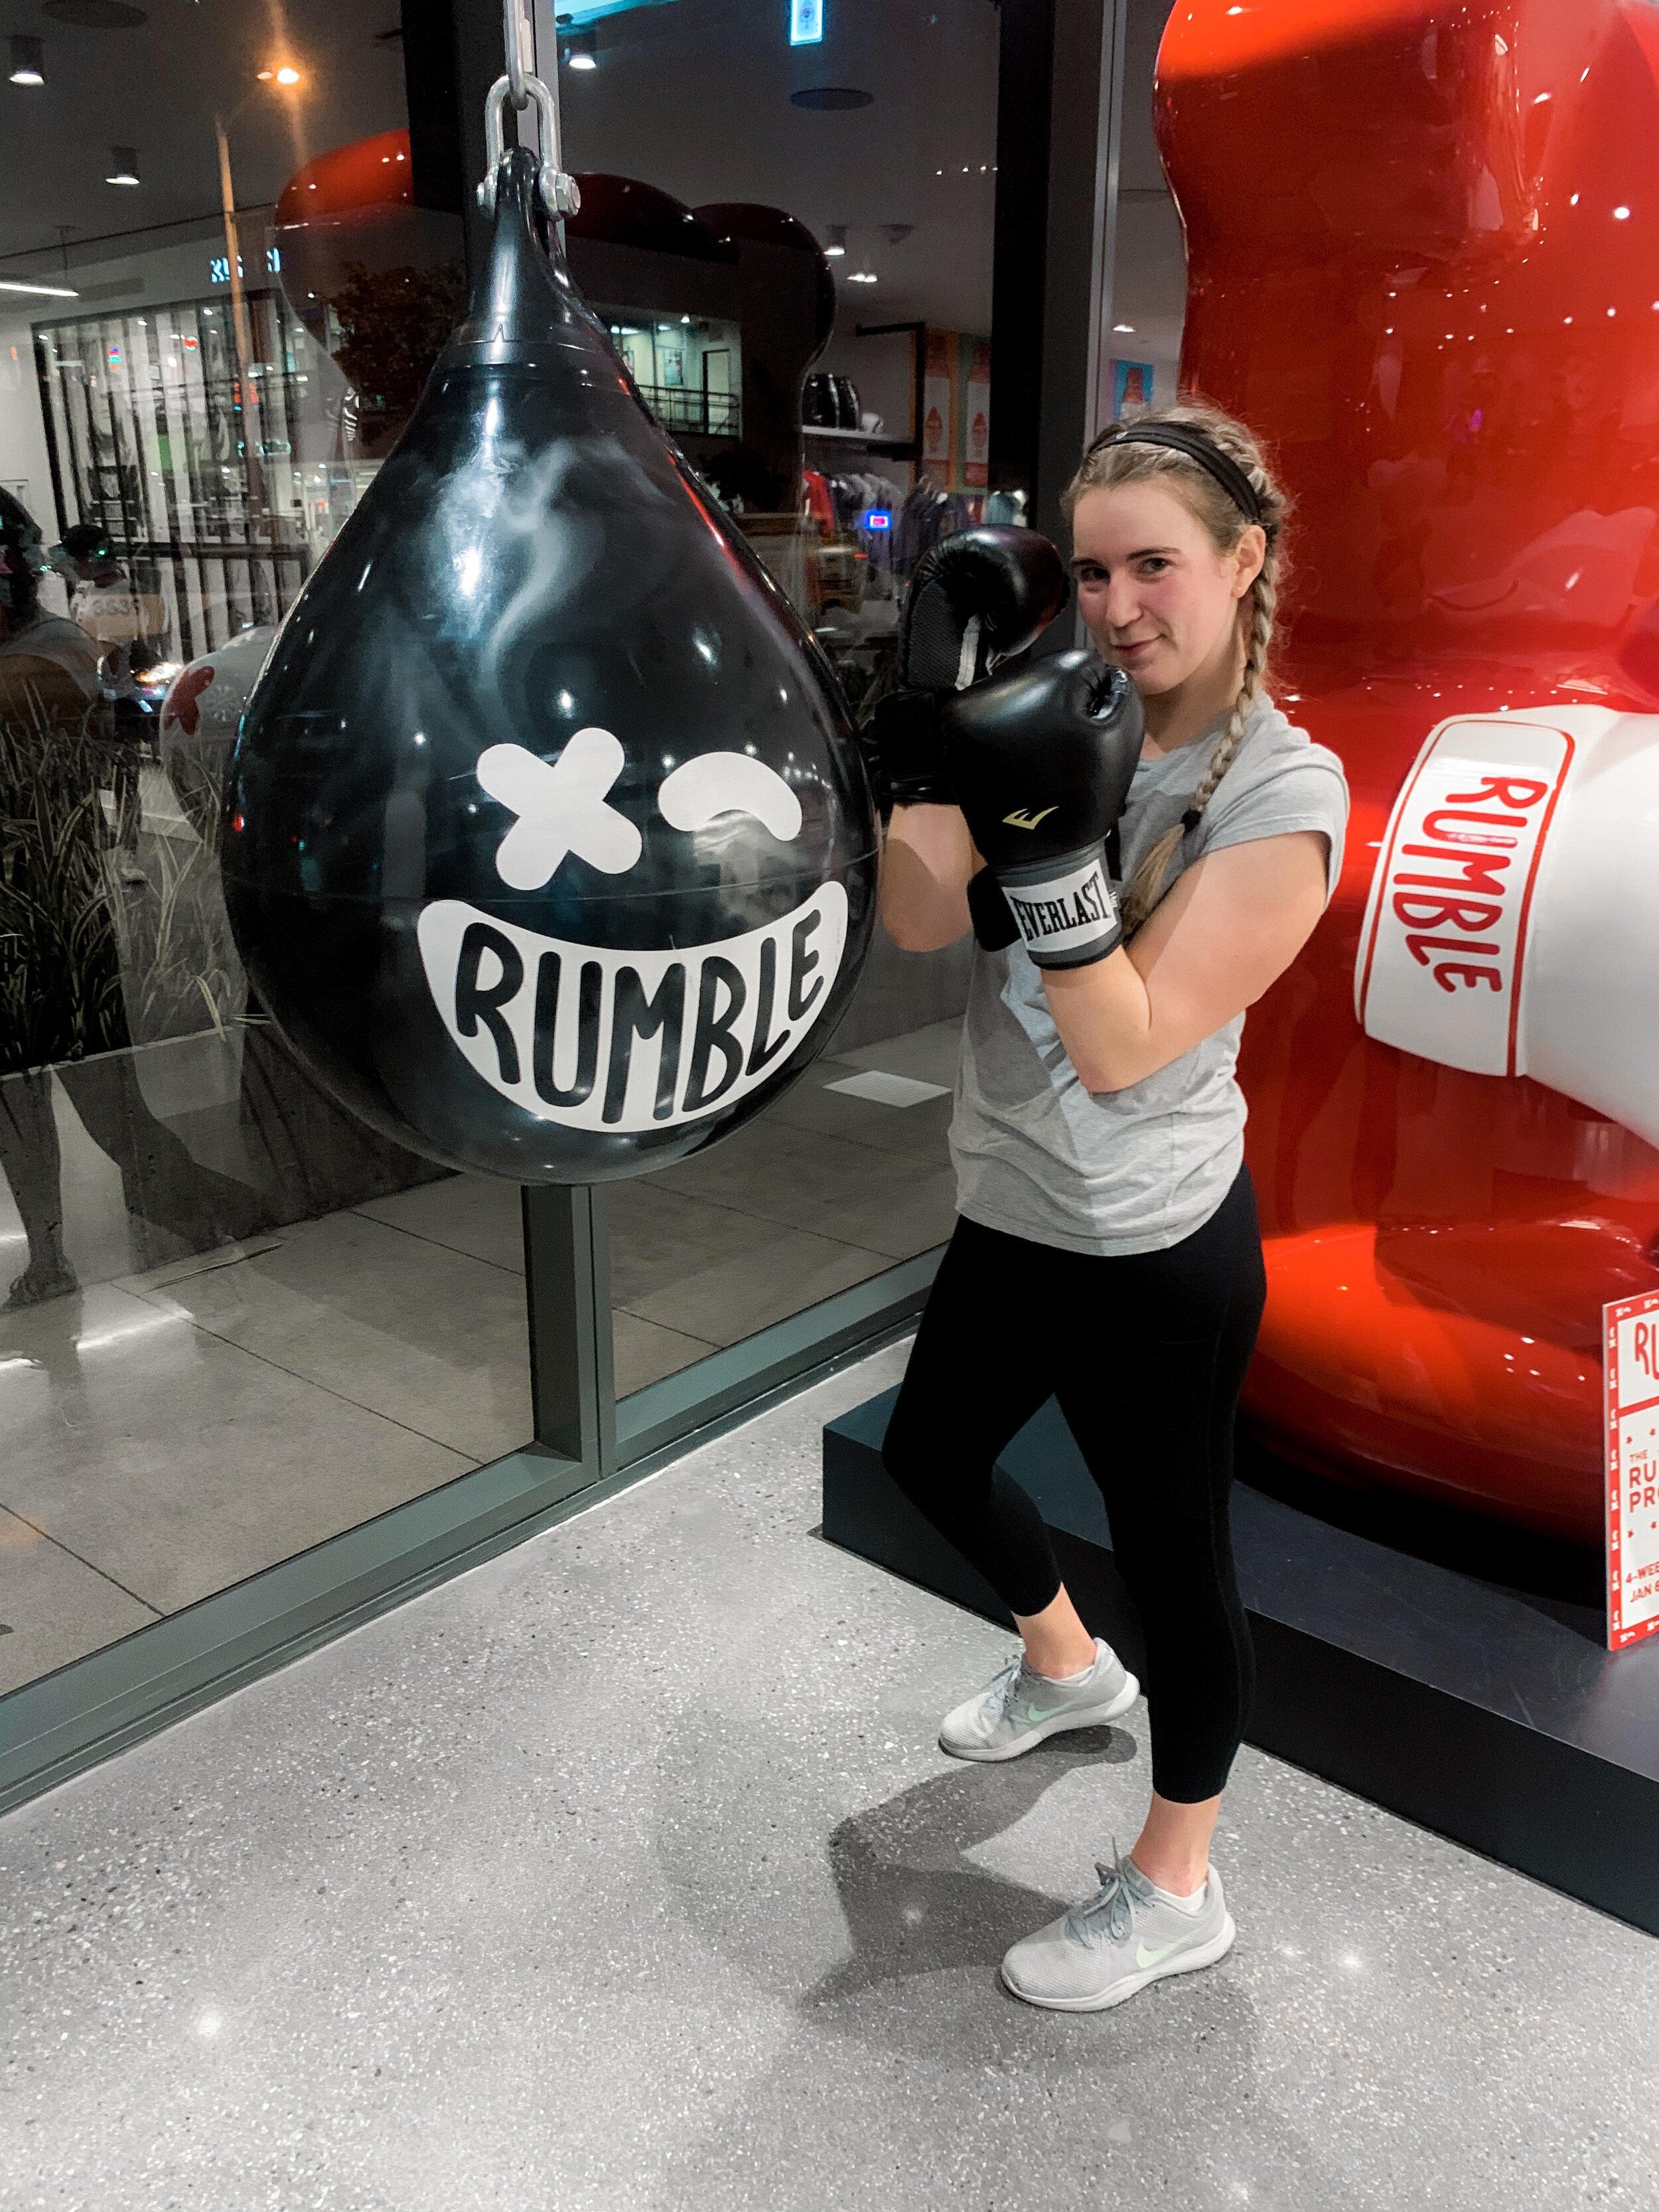 Rumble Boxing Group Fitness  Cardio Strength & Boxing Classes